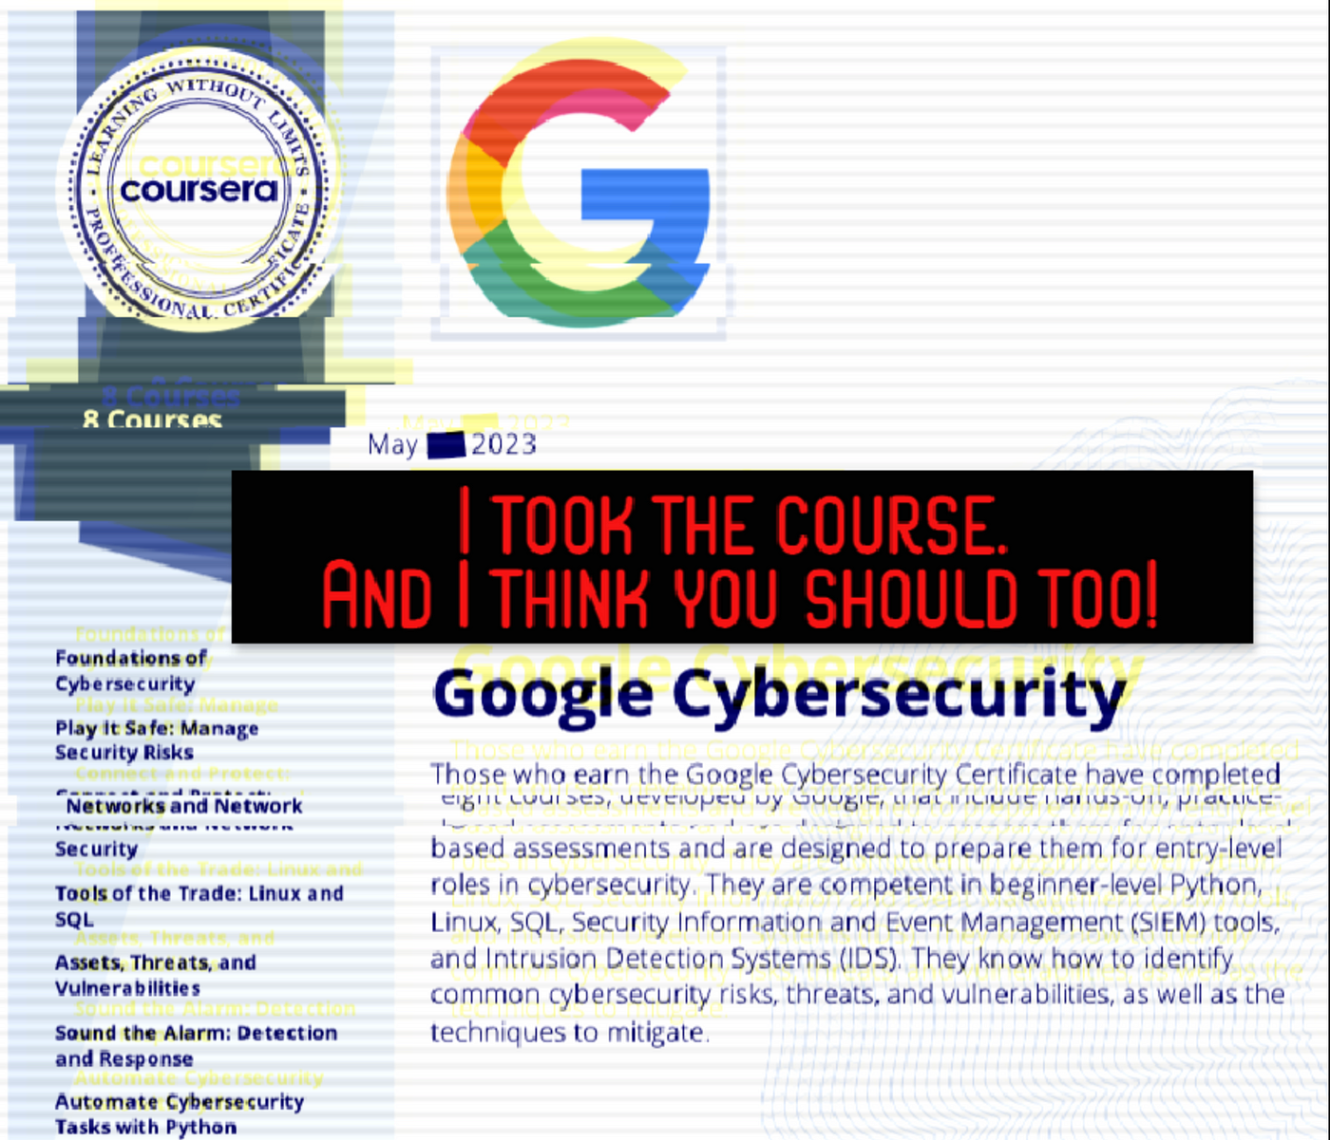 Get Google’s Cybersecurity Certificate And Level Up Your Tech Skills!